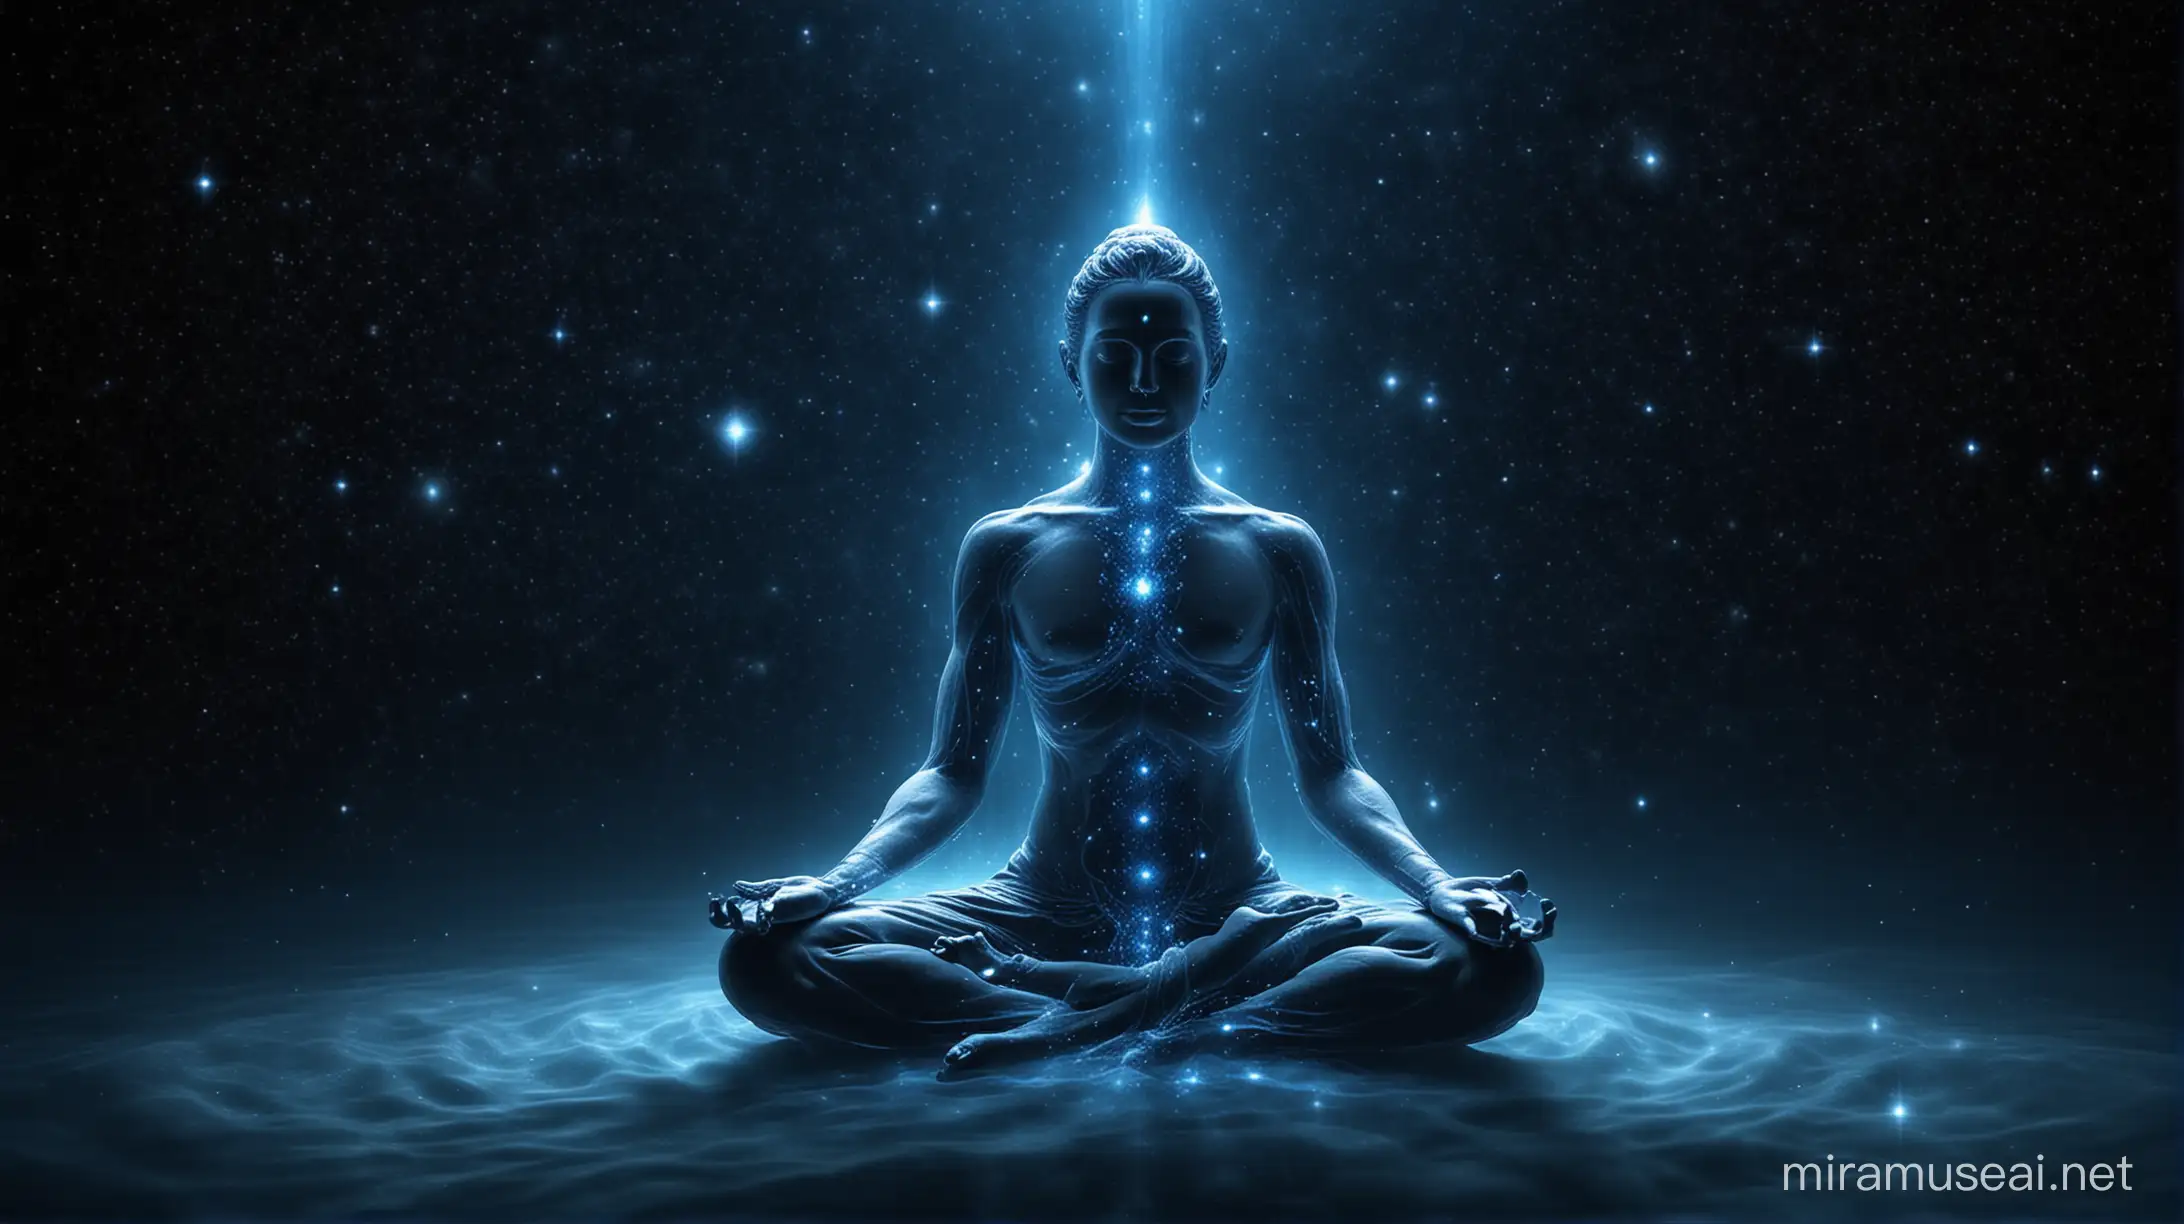 meditating see through blue spirit made out of light floating  in deep space
